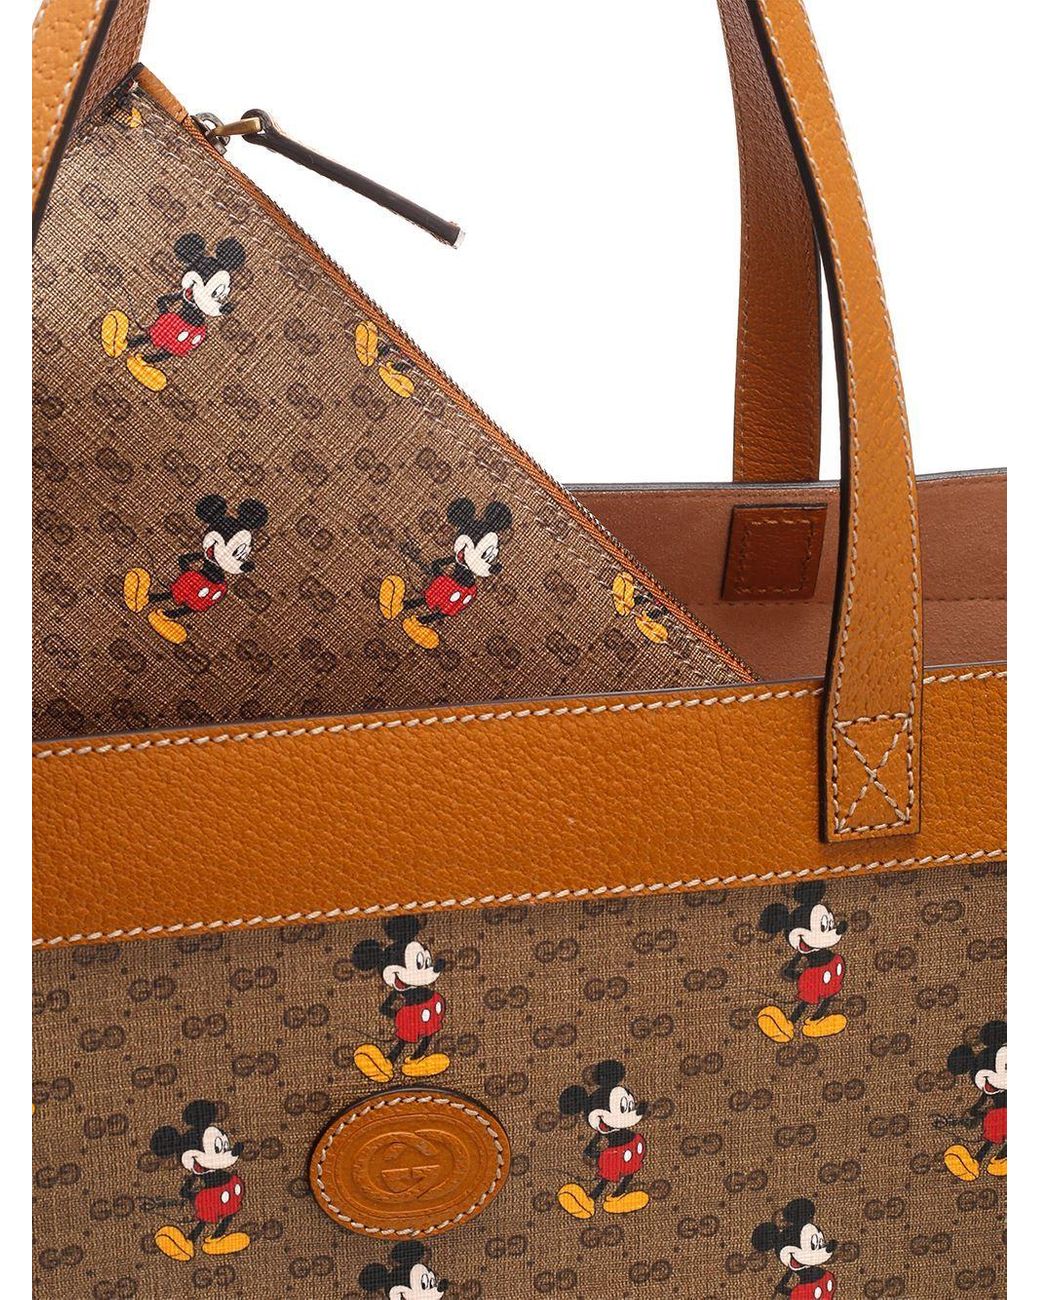 Gucci X Disney Mickey Mouse Print Medium Tote Bag in Natural for Men | Lyst